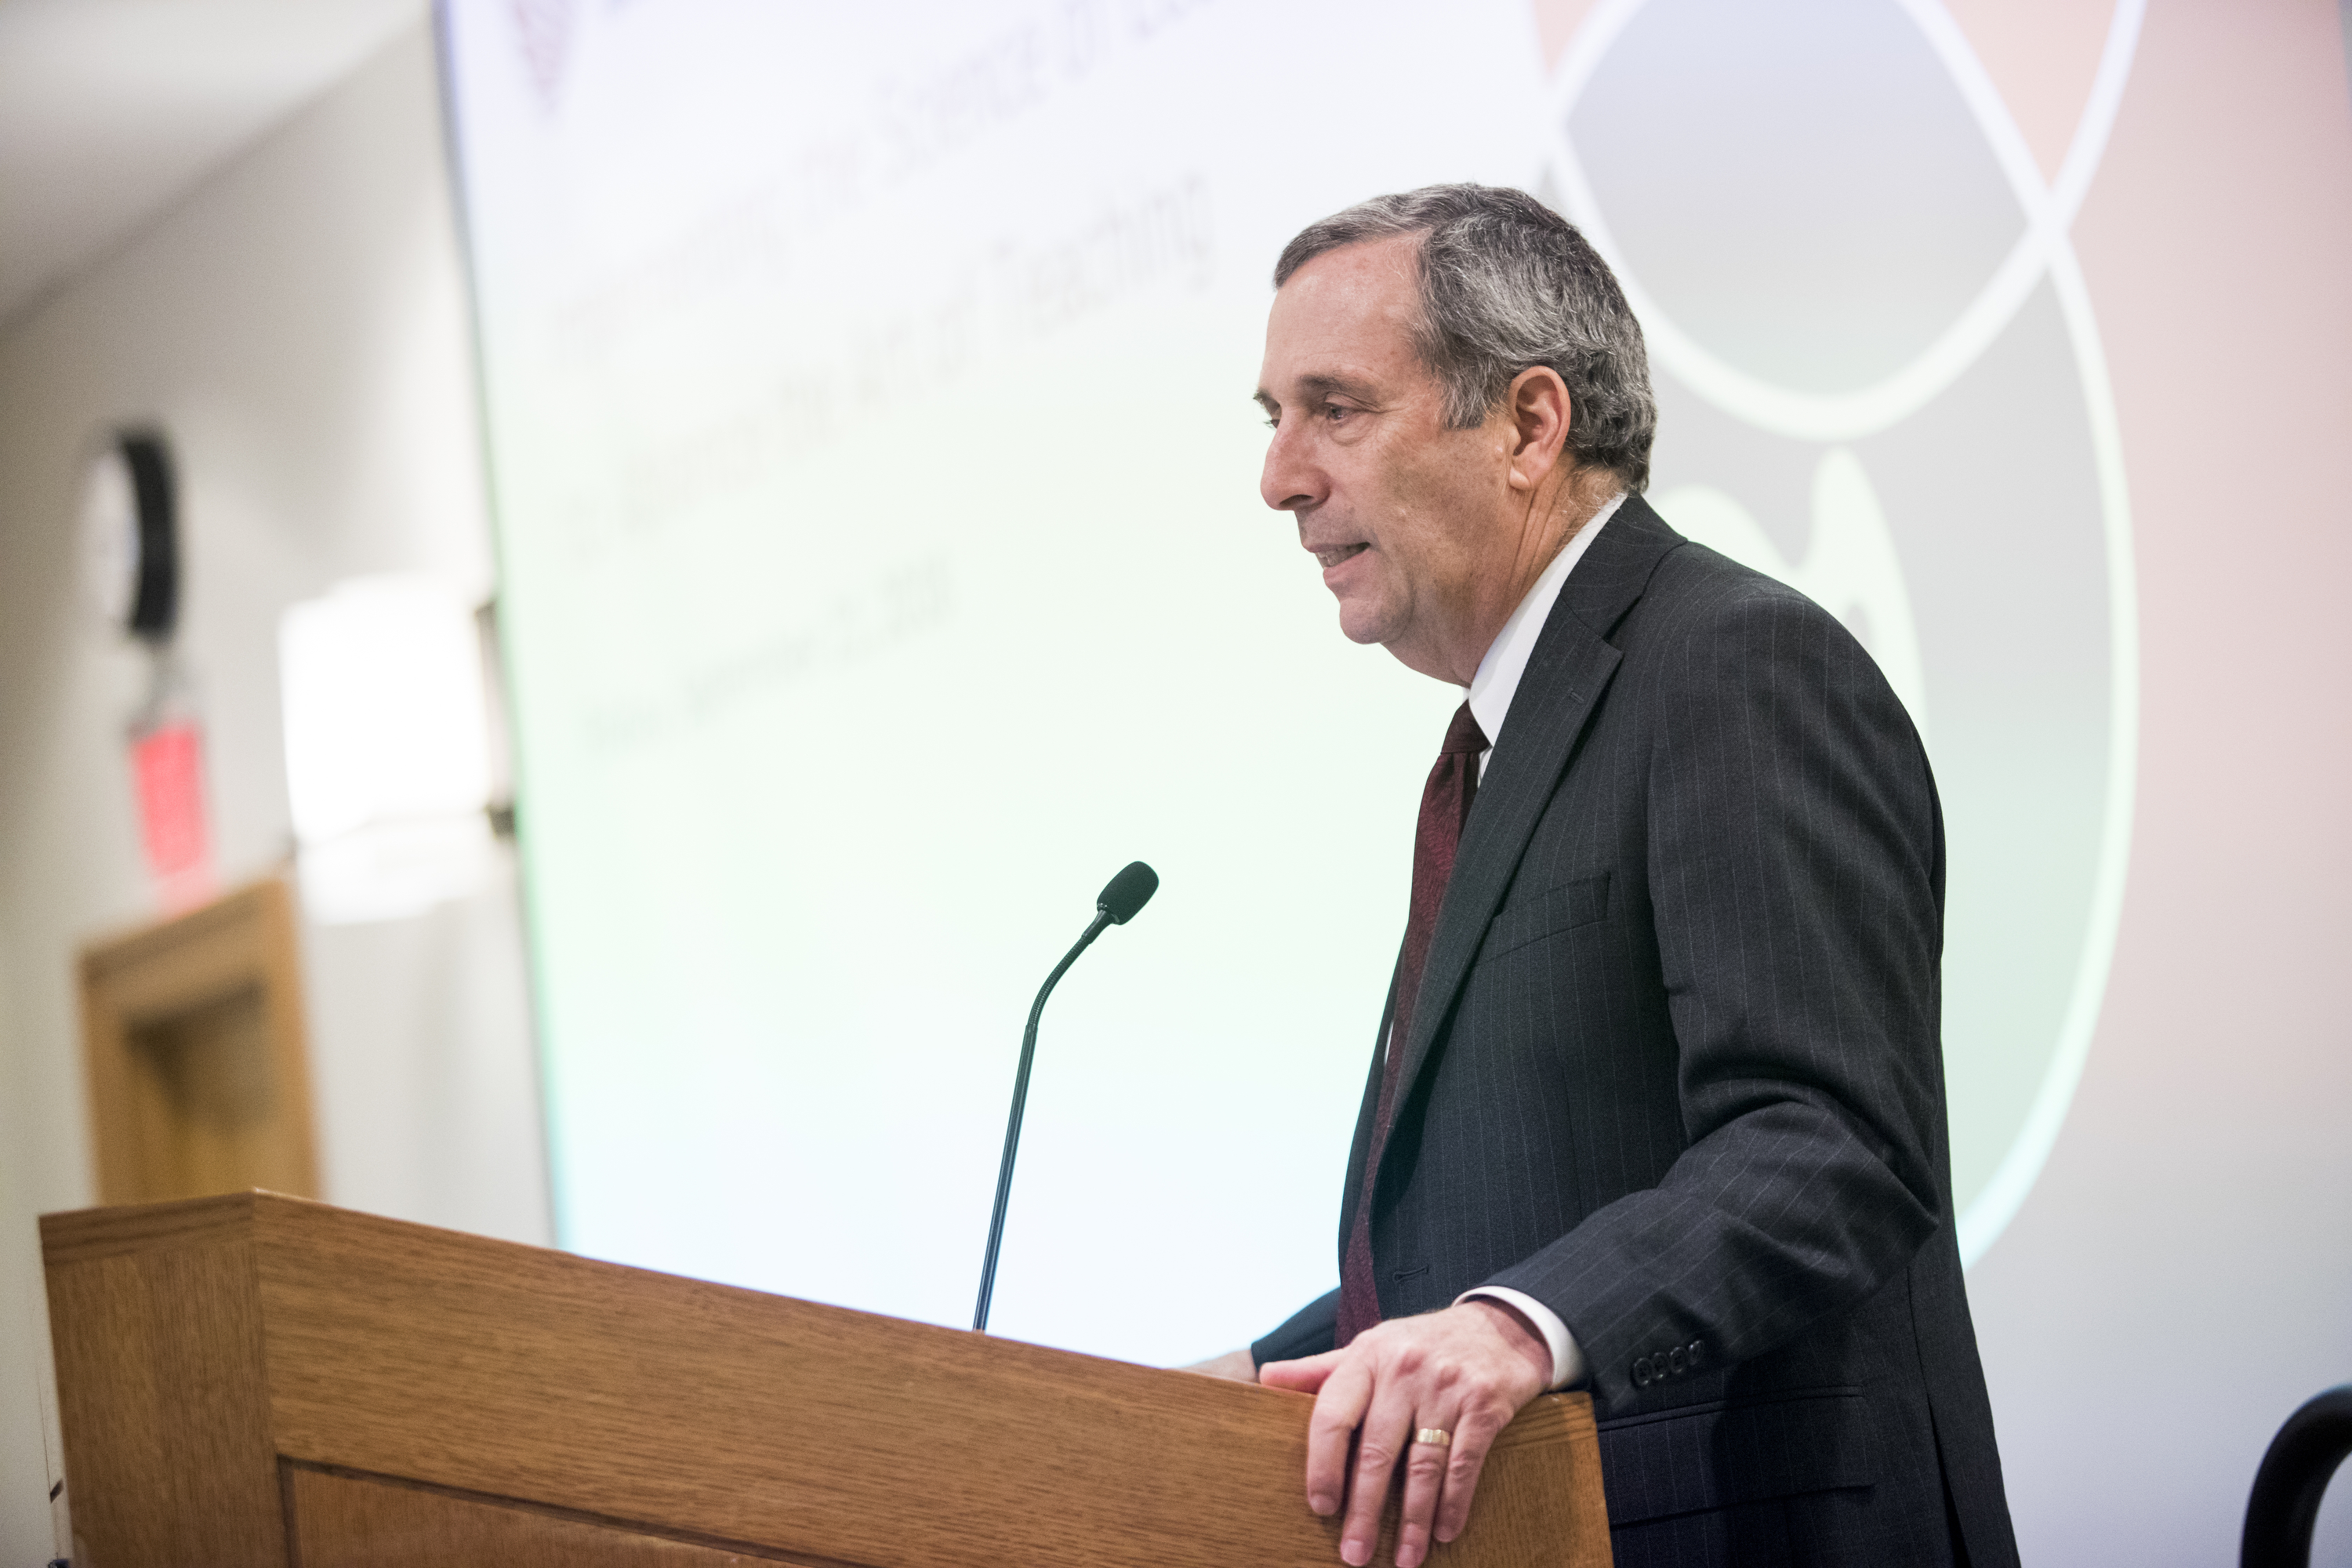 President Lawrence S. Bacow welcomes conference attendees